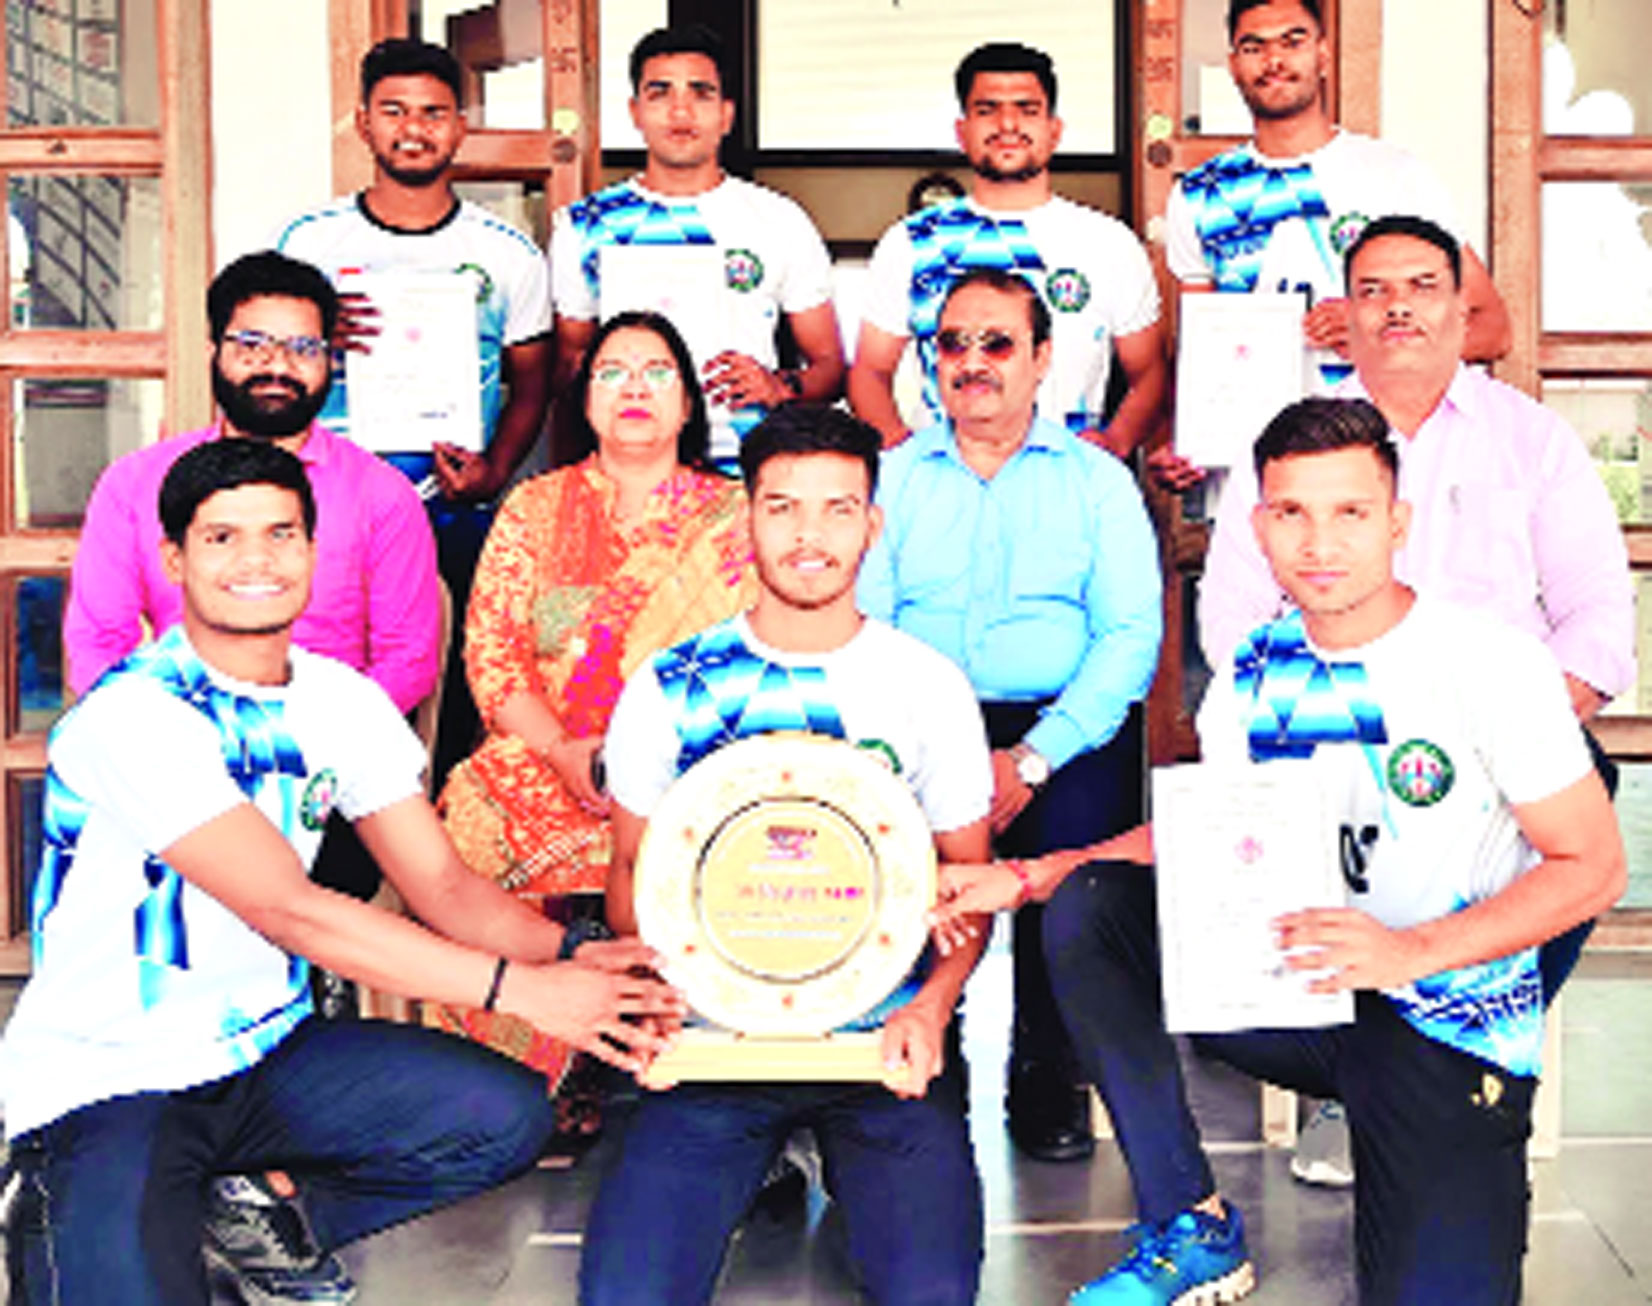 Indore division winner in state level Kabaddi (men) competition